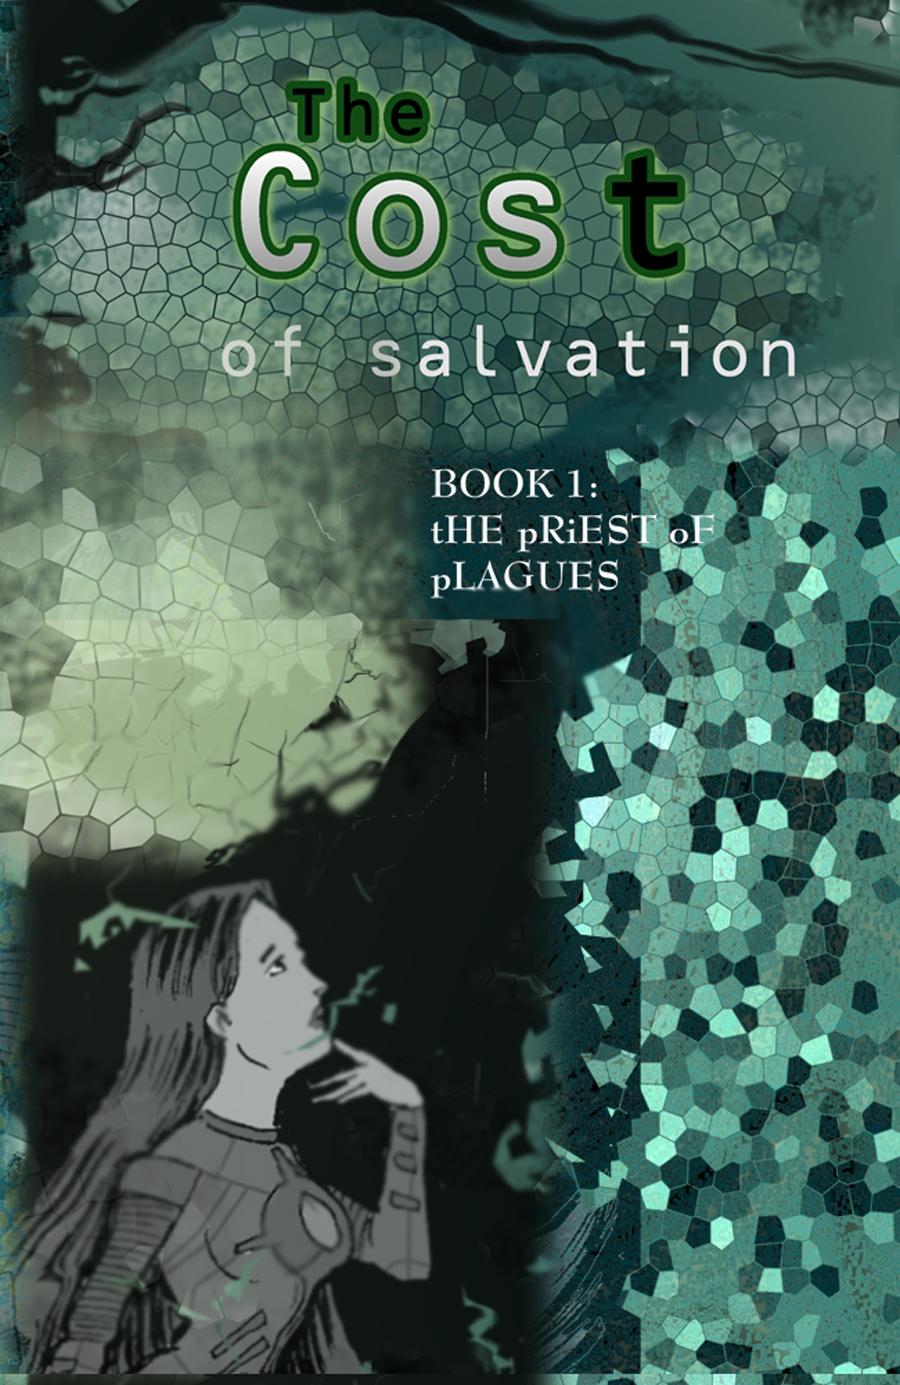 The Cost of Salvation: The Priest of Plagues